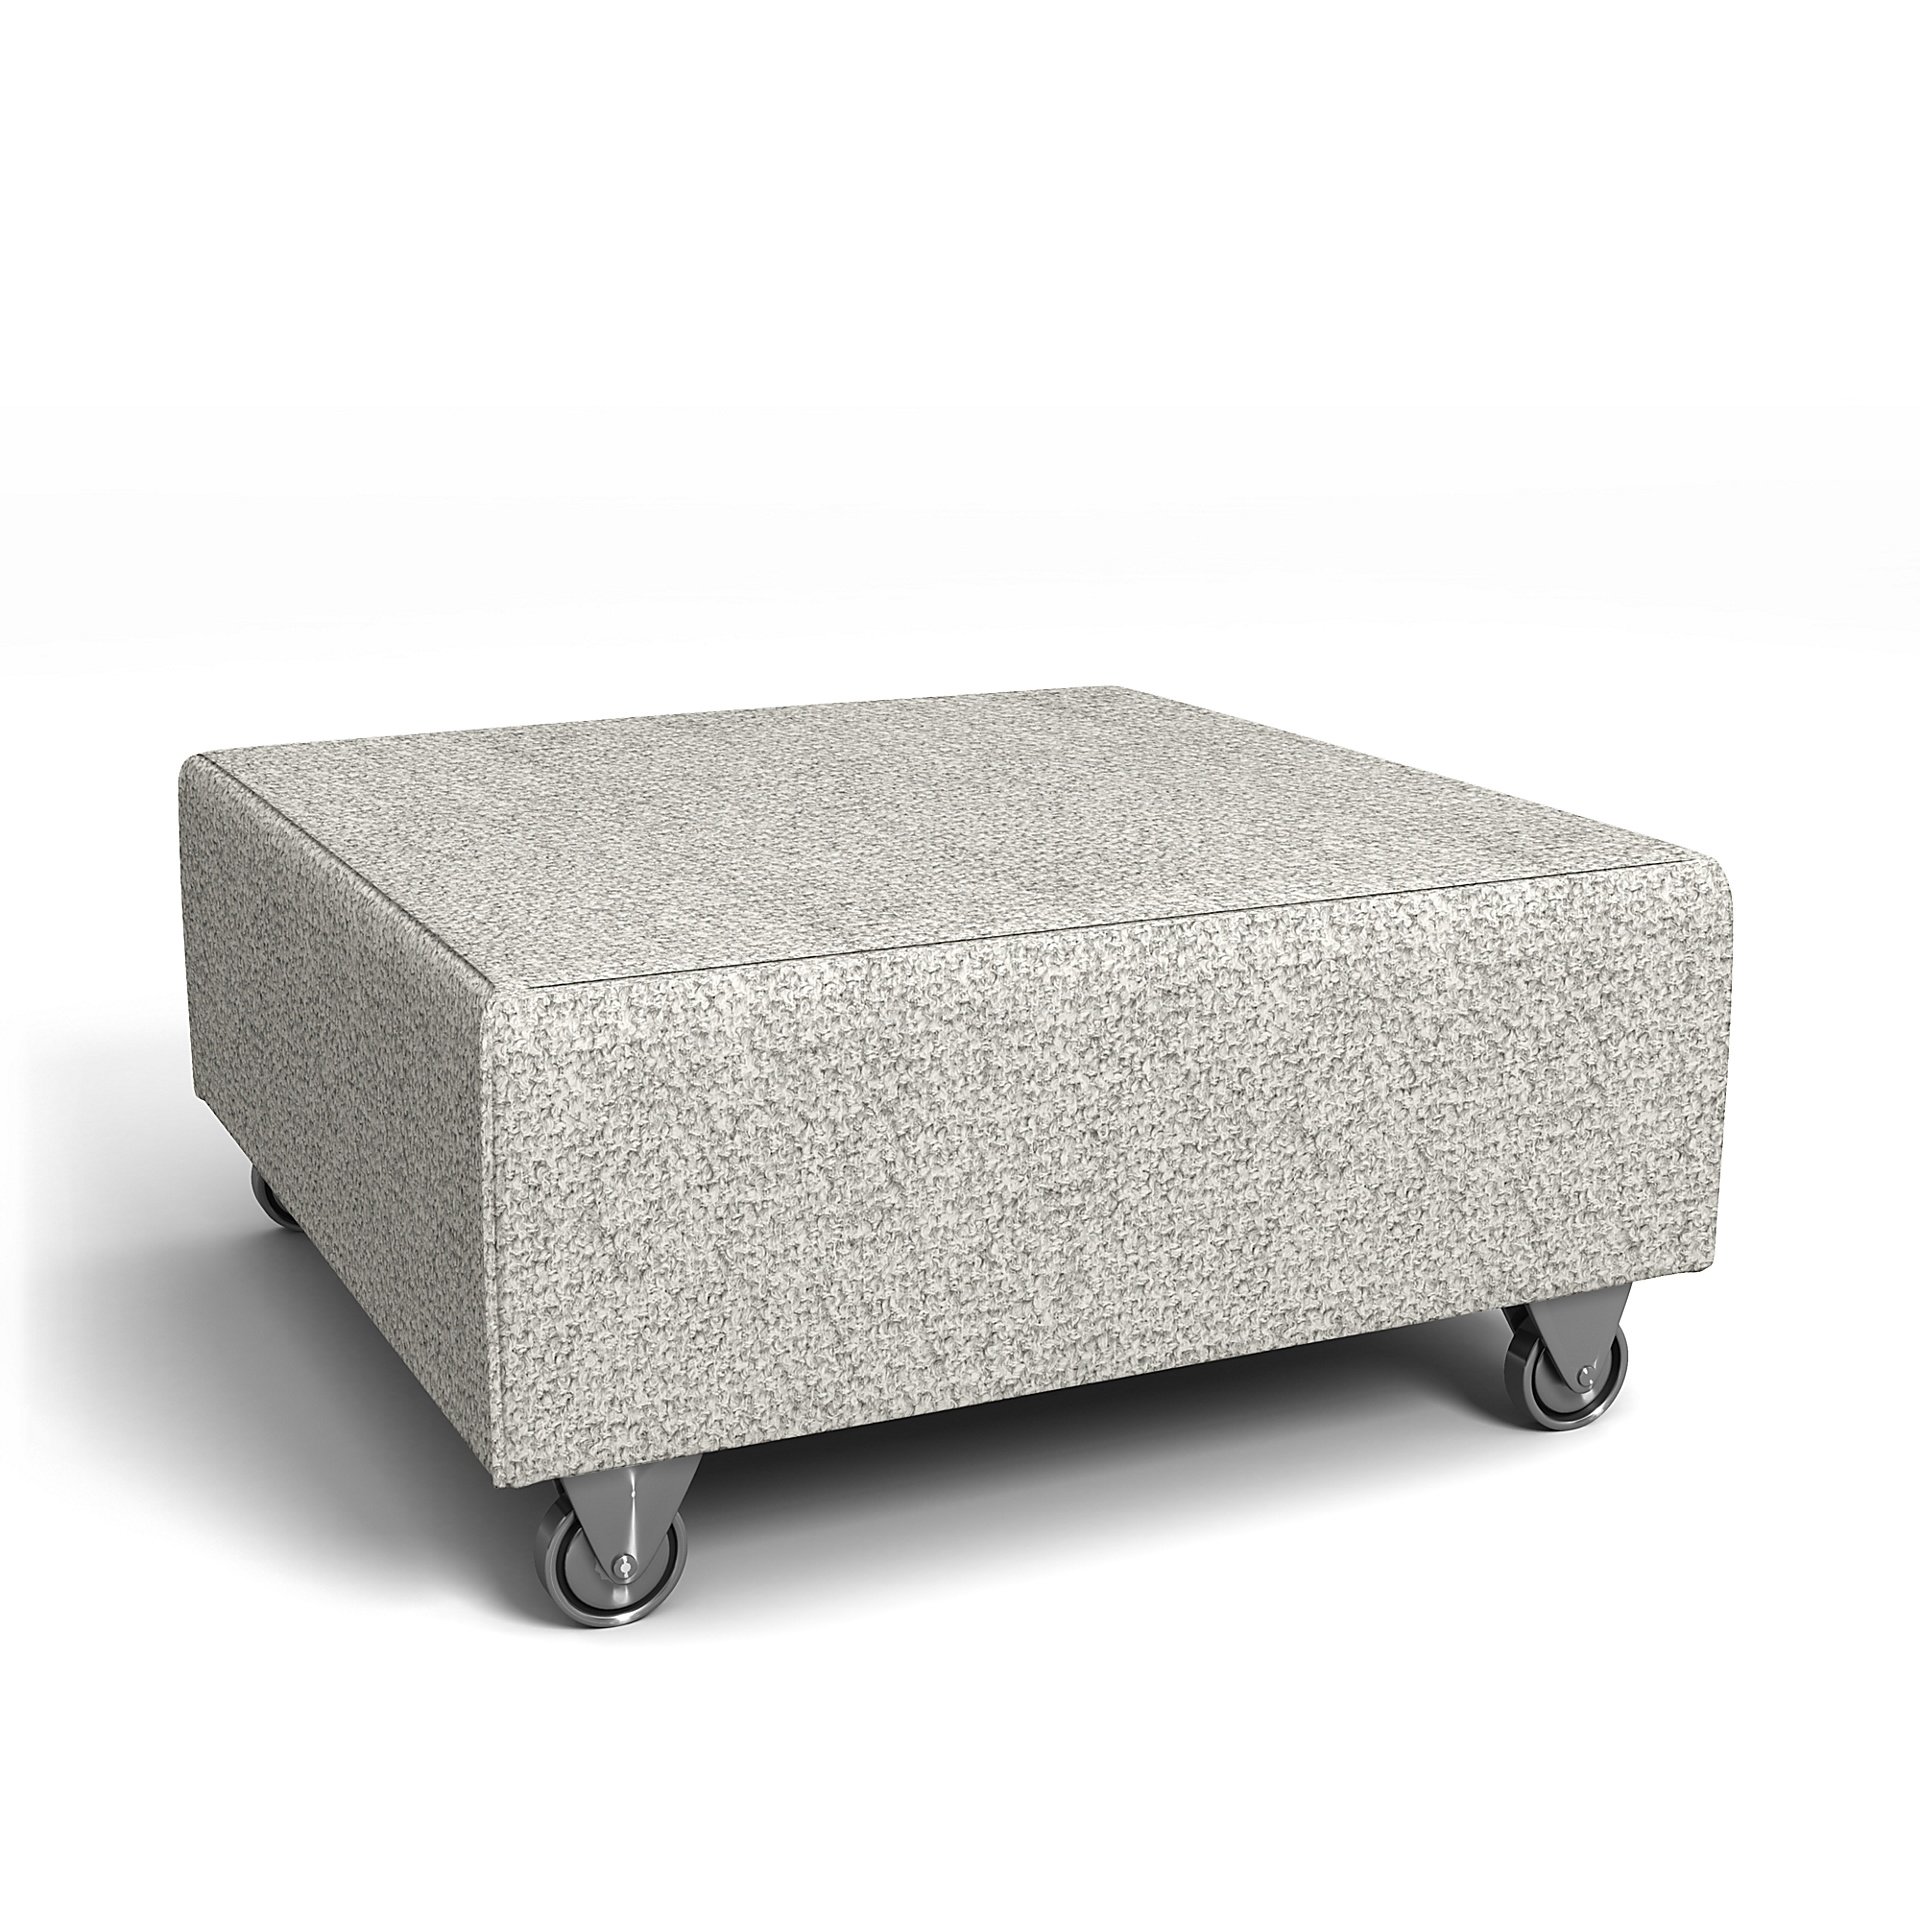 IKEA - Falsterbo Footstool Cover, Driftwood, Boucle & Texture - Bemz